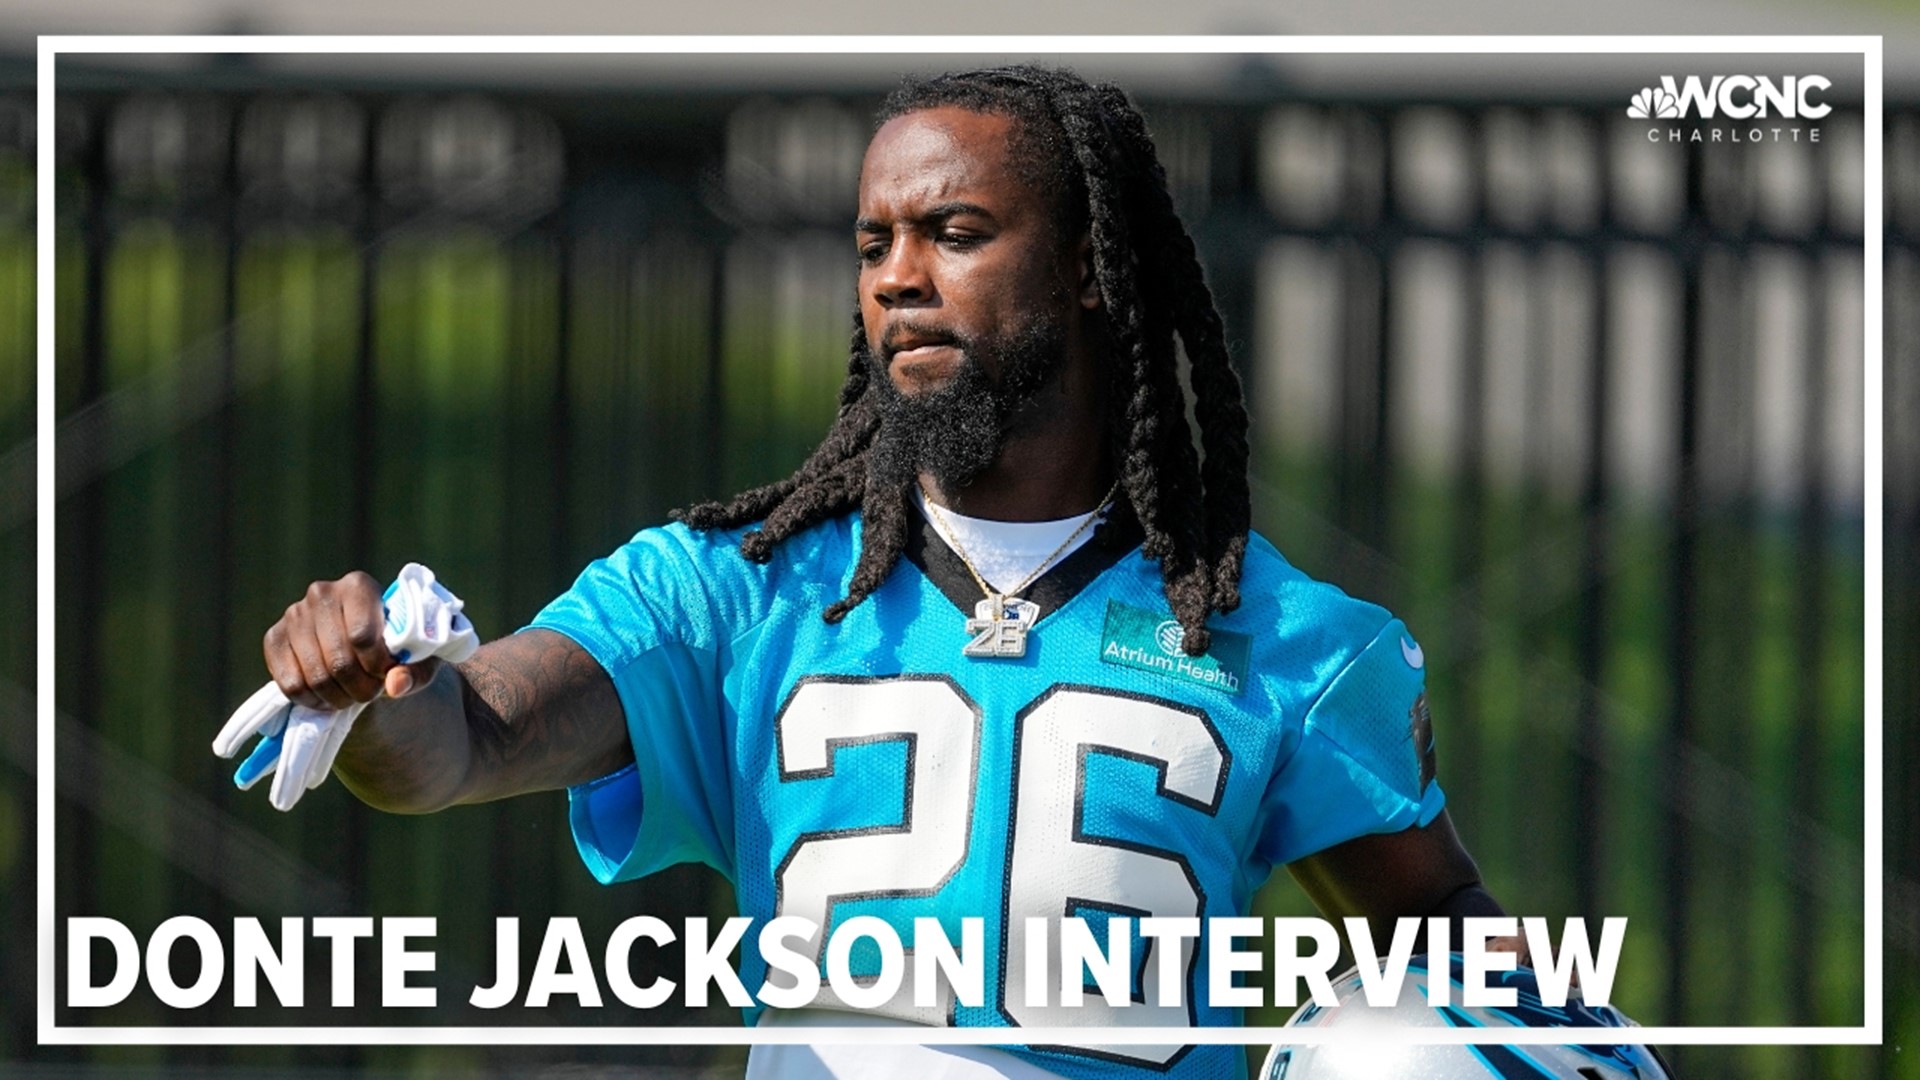 Donte Jackson spoke with WCNC Charlotte's Ashley Stroehlein about coming back from an injury that sidelined him in 2022.